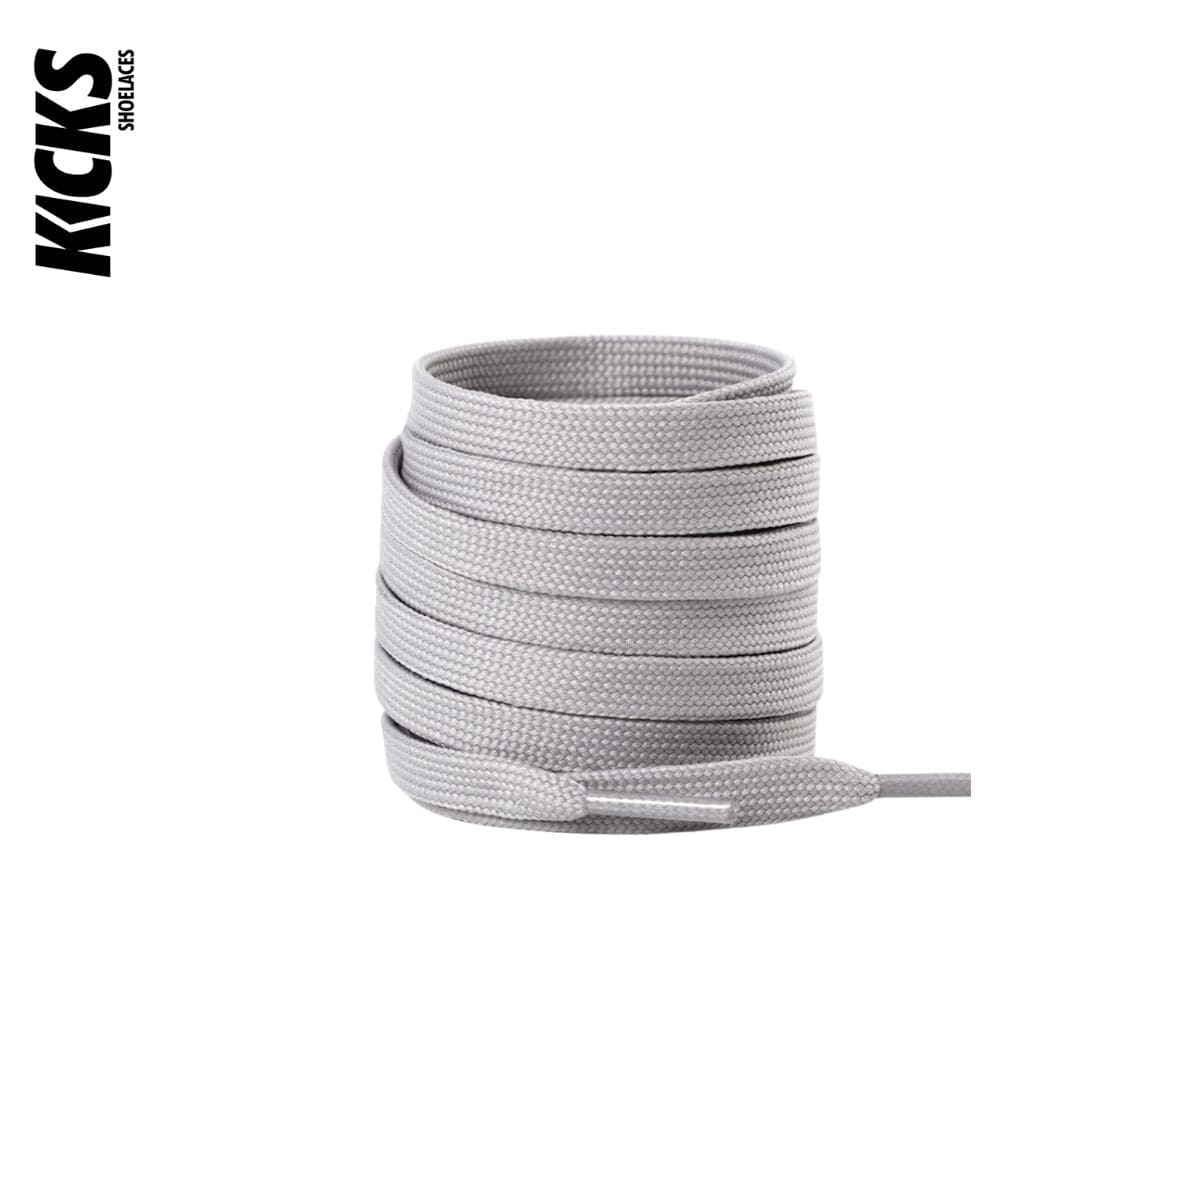 Light Grey Replacement Shoe Laces for Adidas NMD Sneakers by Kicks Shoelaces